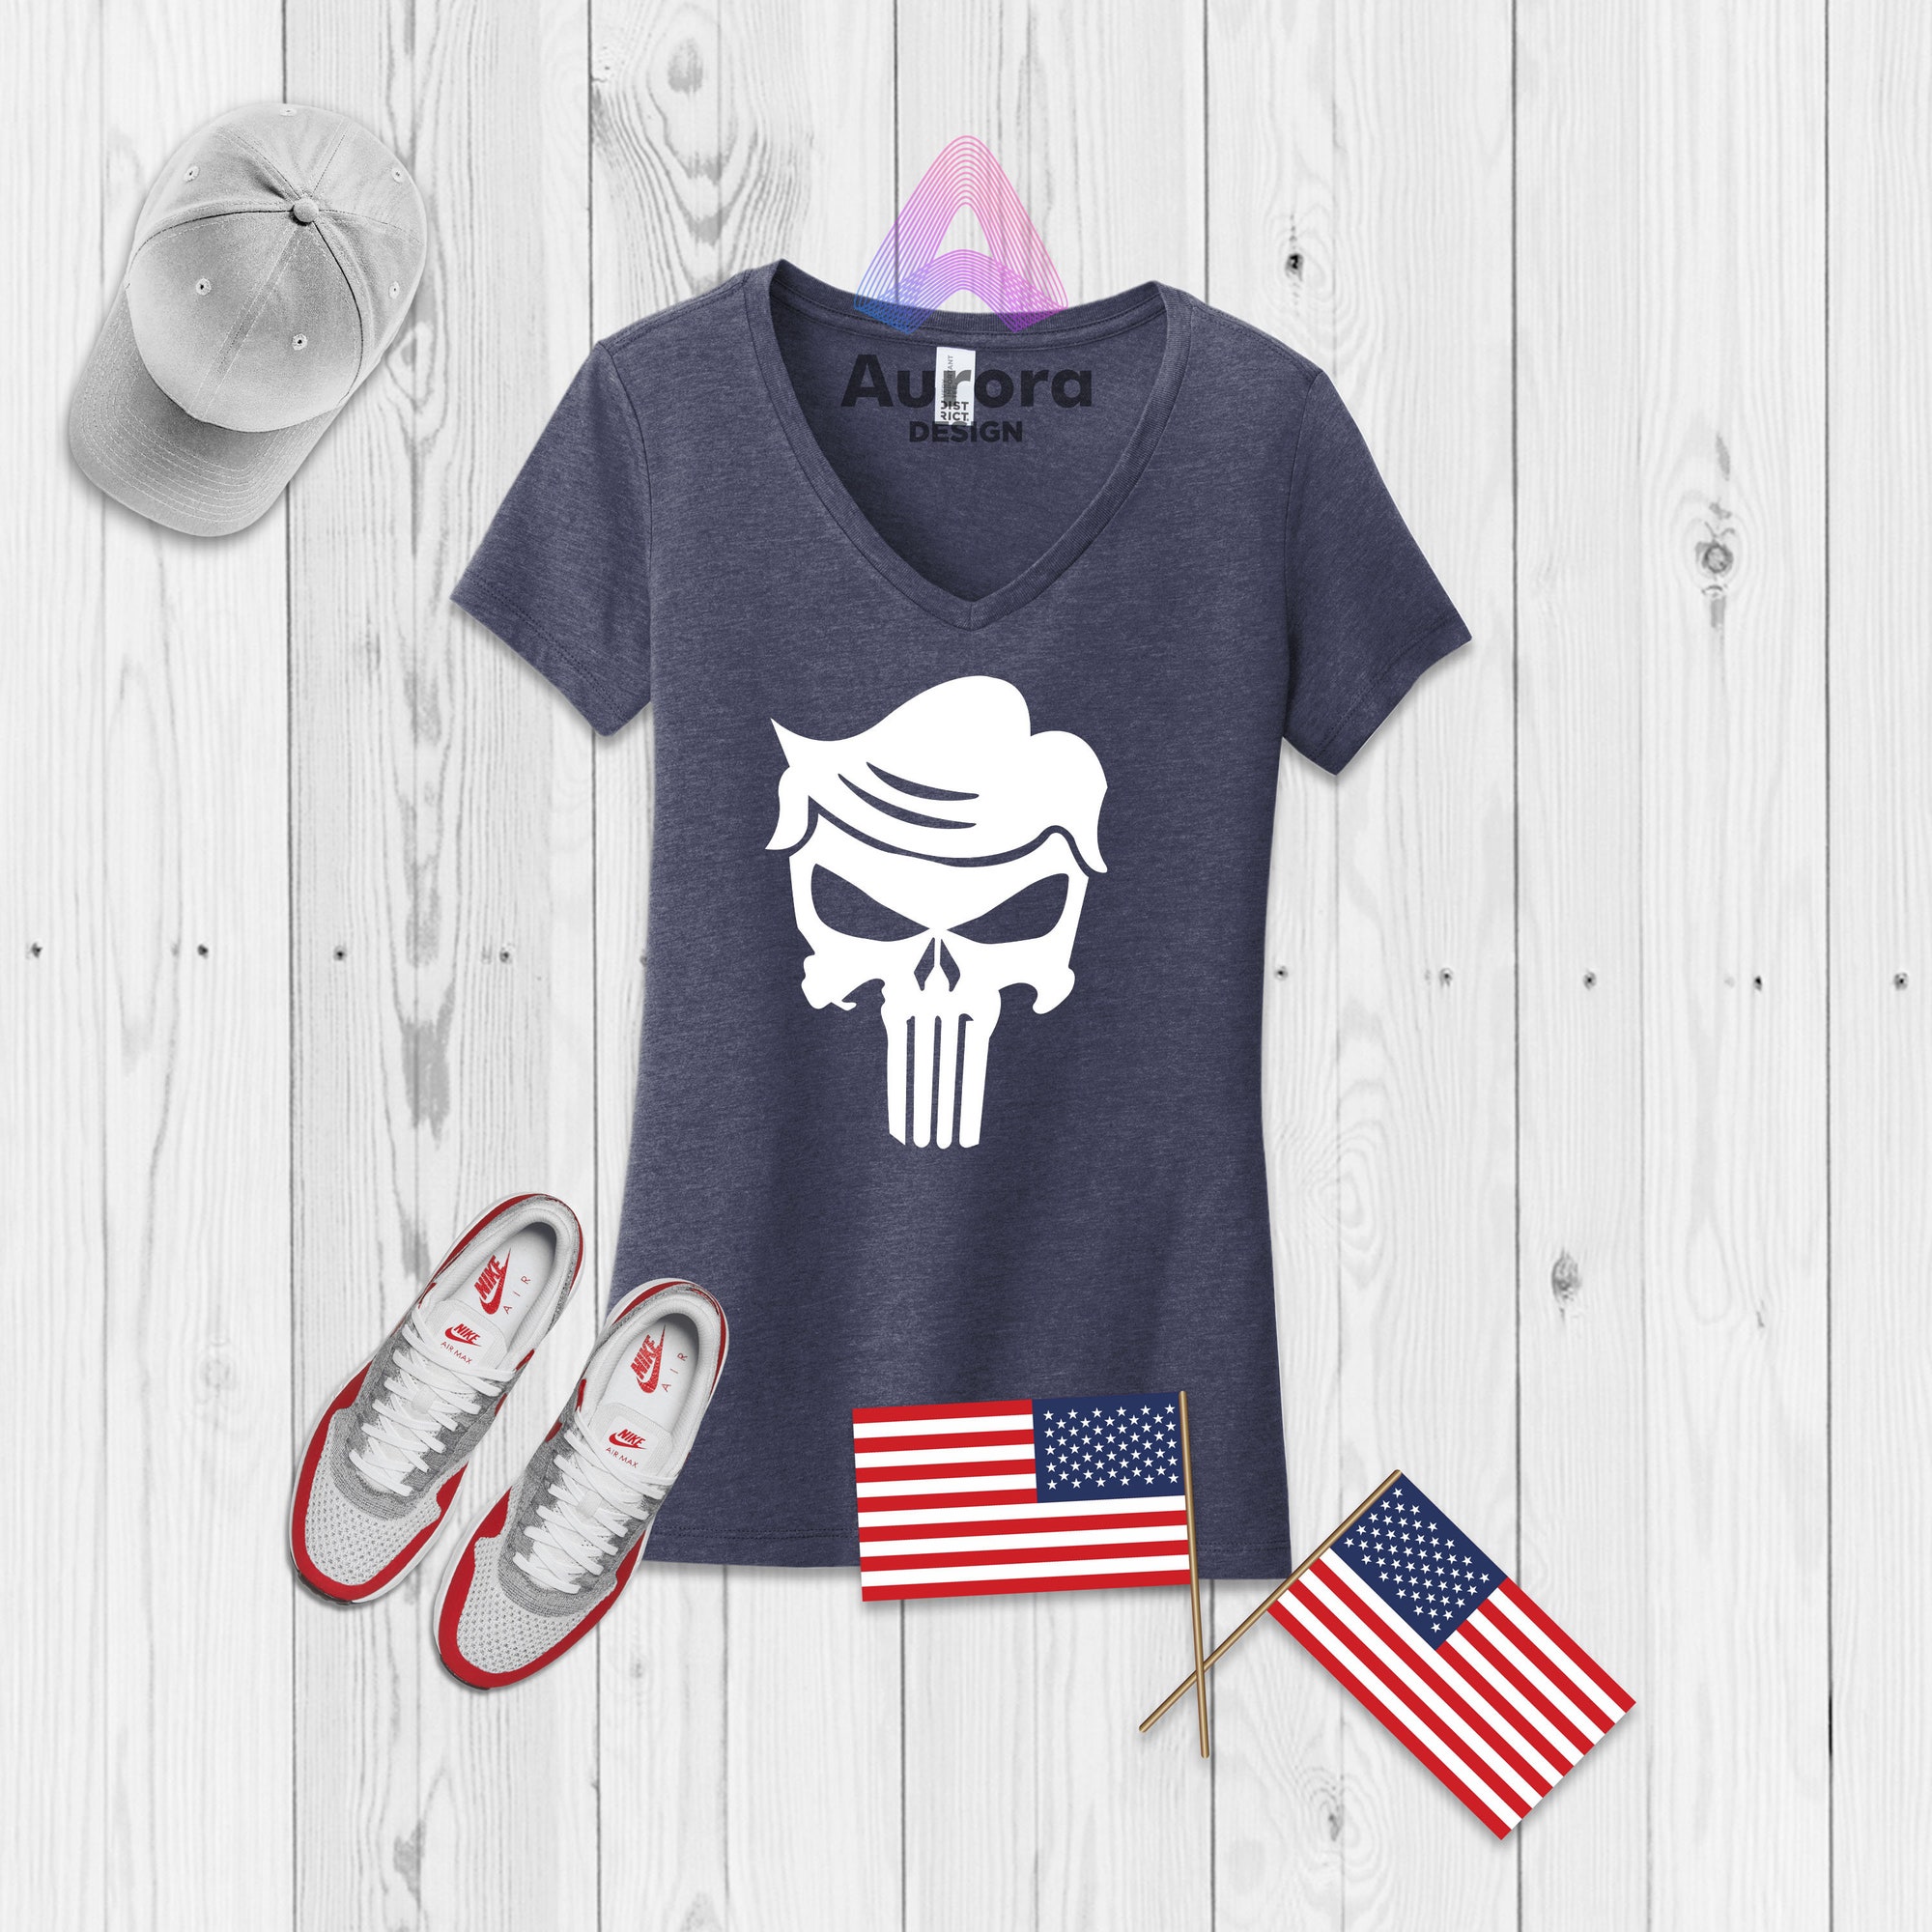 Discover Trump Punisher T-shirt, Funny Political Shirt, Funny Election Shirts, Republican T-shirt, Political Military Edition Tees, Patriotic T-shirt